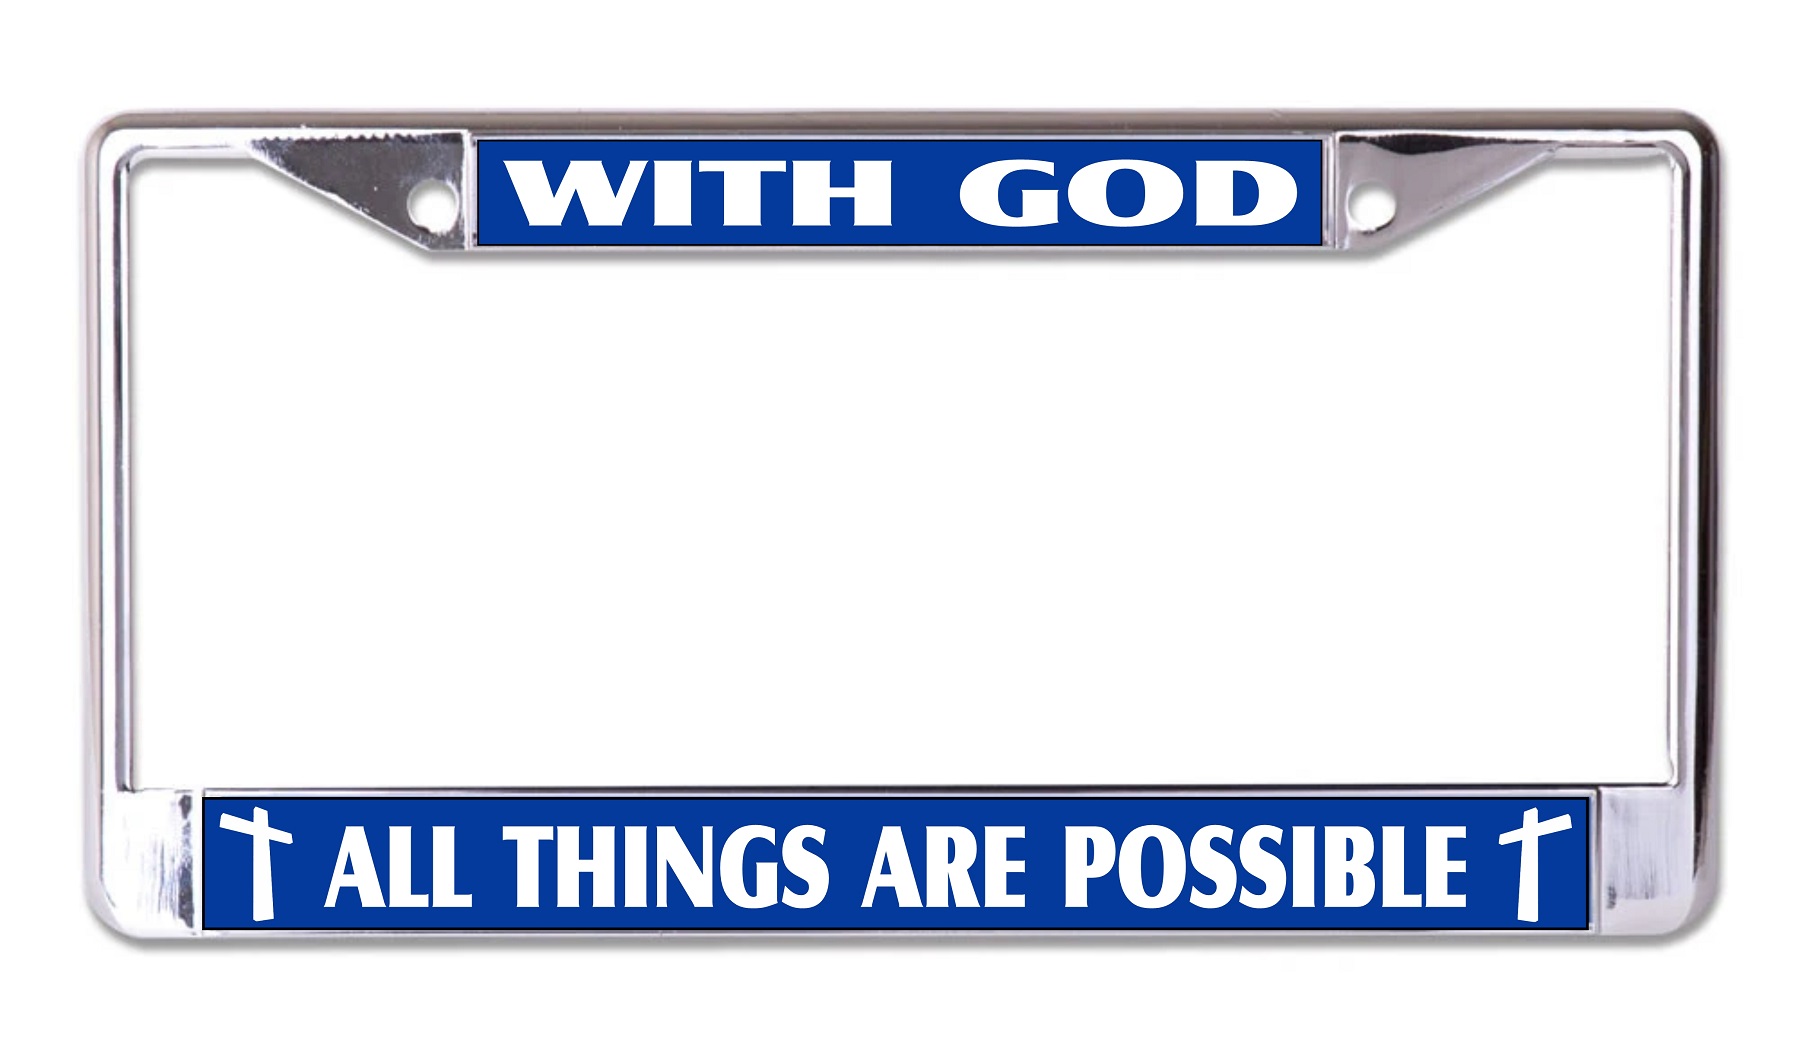 With God All Things Are Possible on Blue Chrome License Plate FRAME